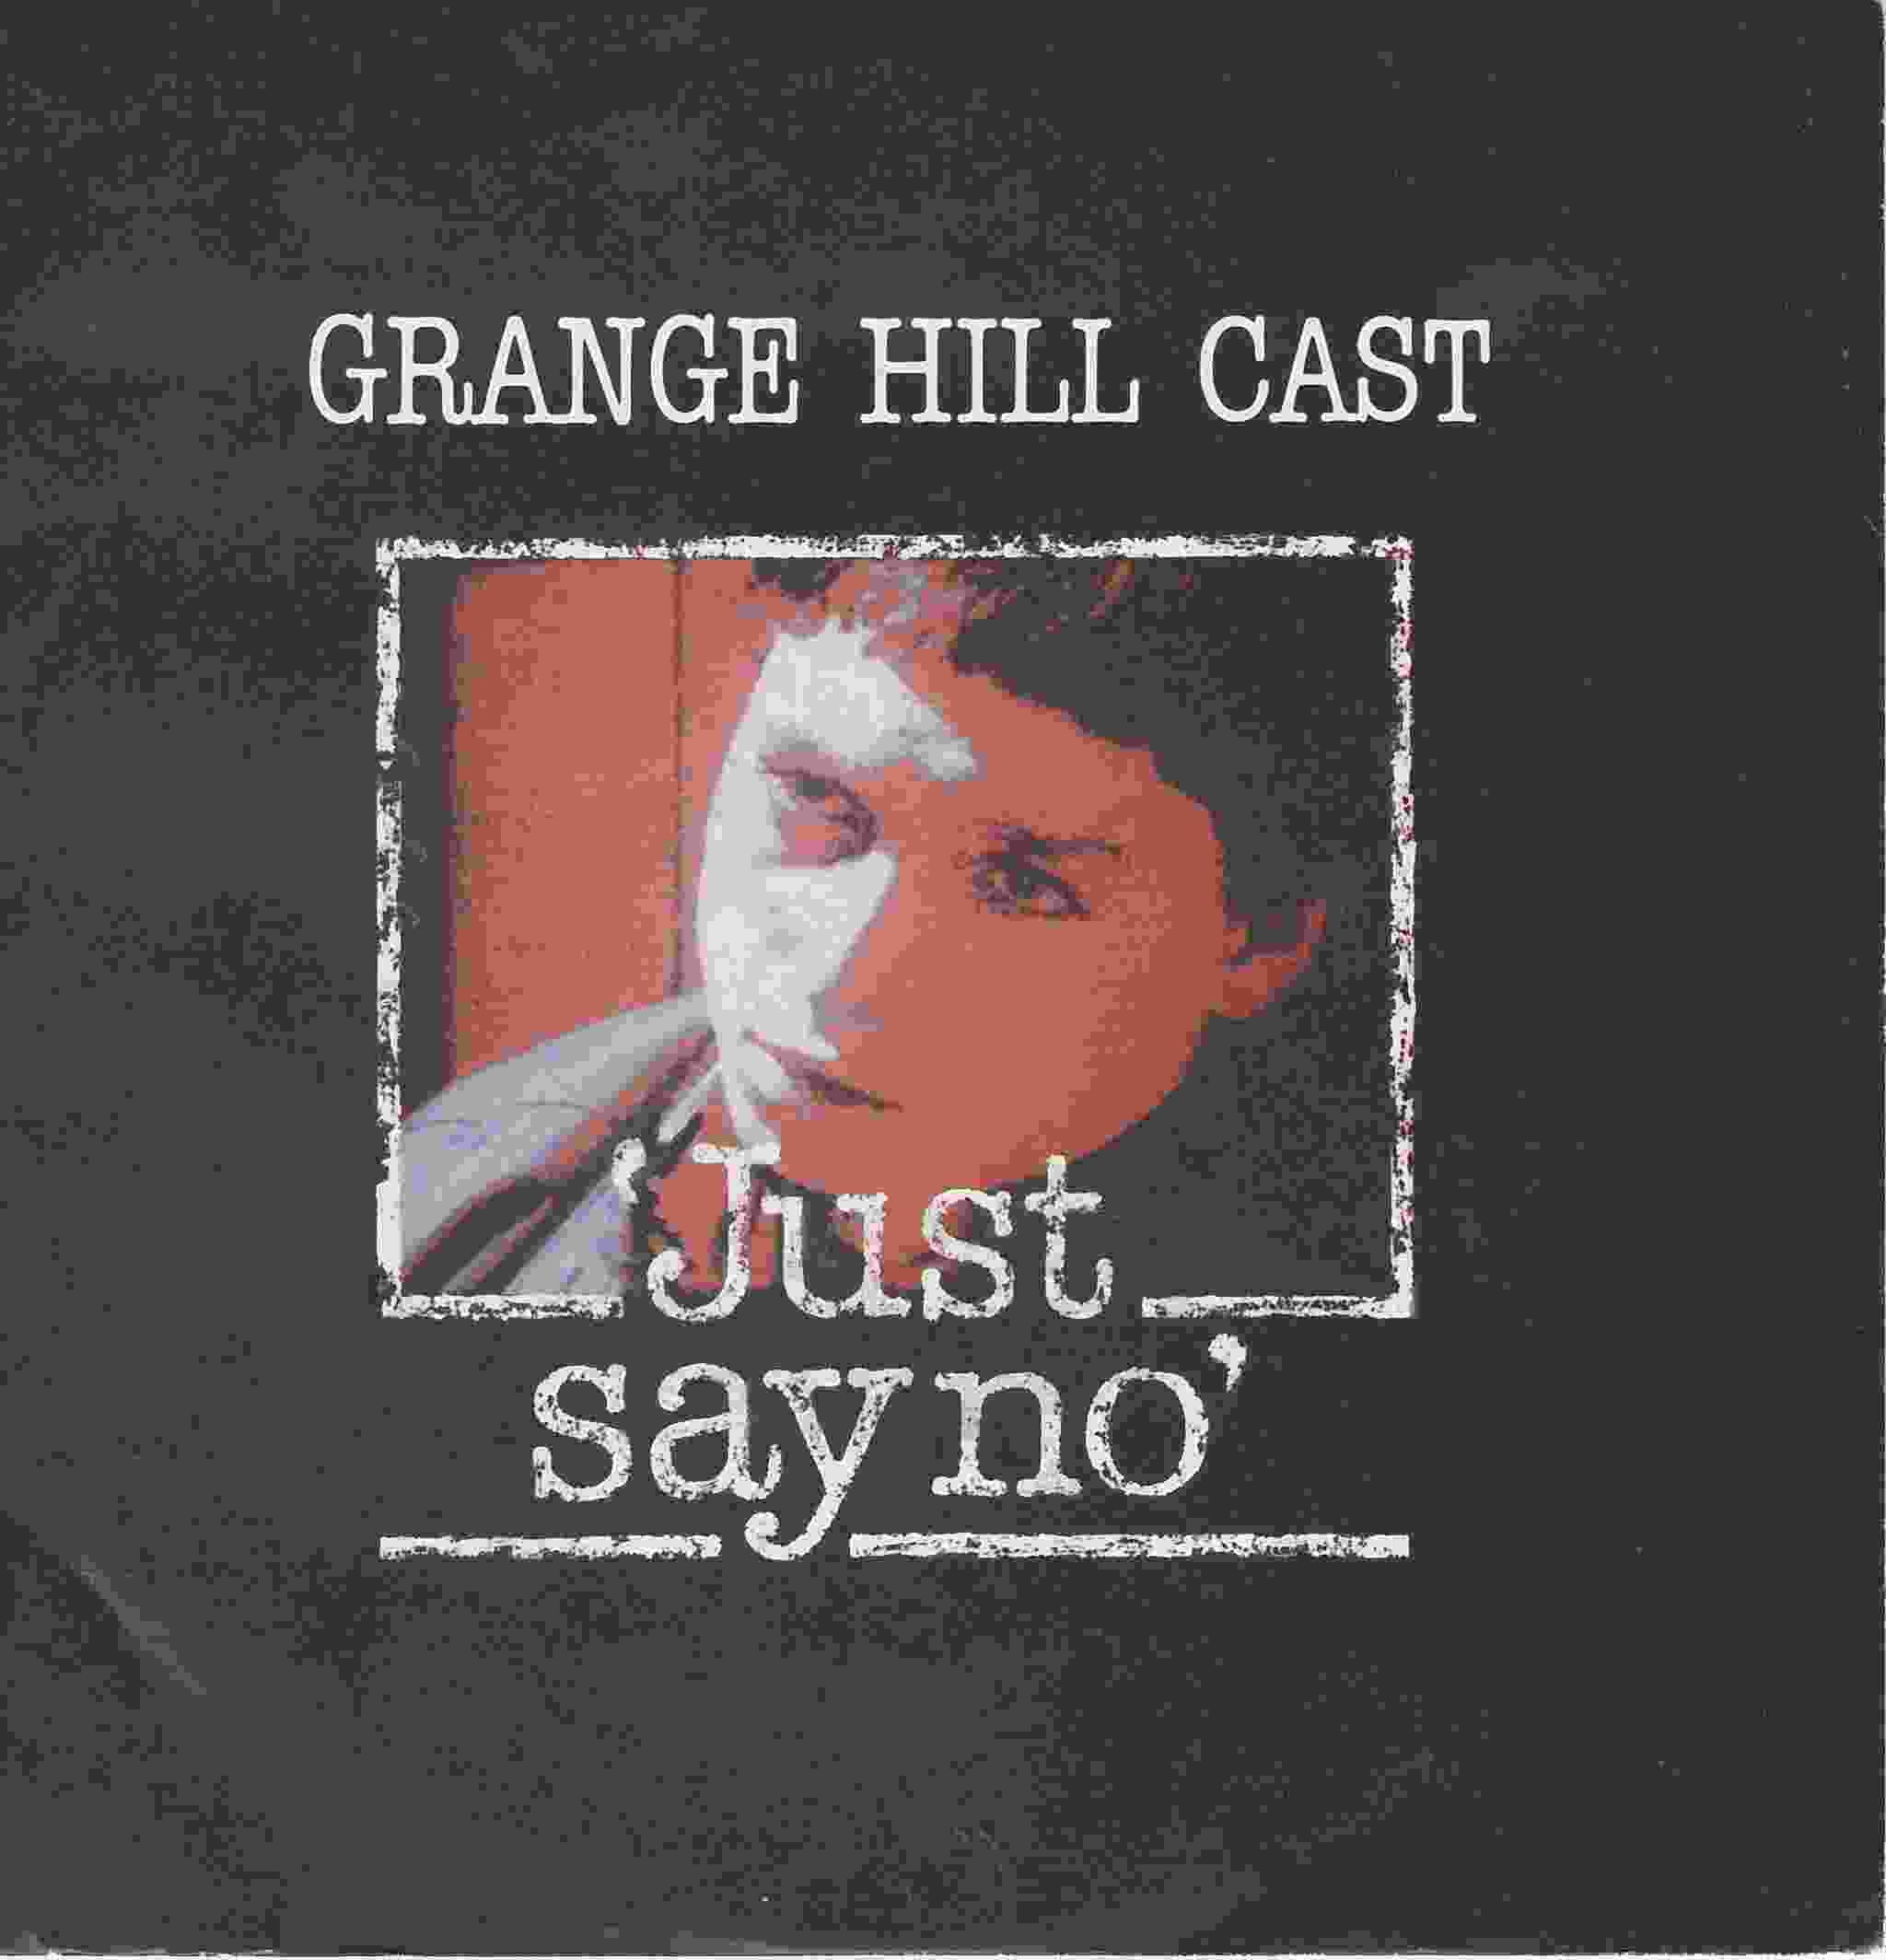 Picture of RESL 183 Just say no (Grange Hill) by artist Grange Hill cast from the BBC singles - Records and Tapes library